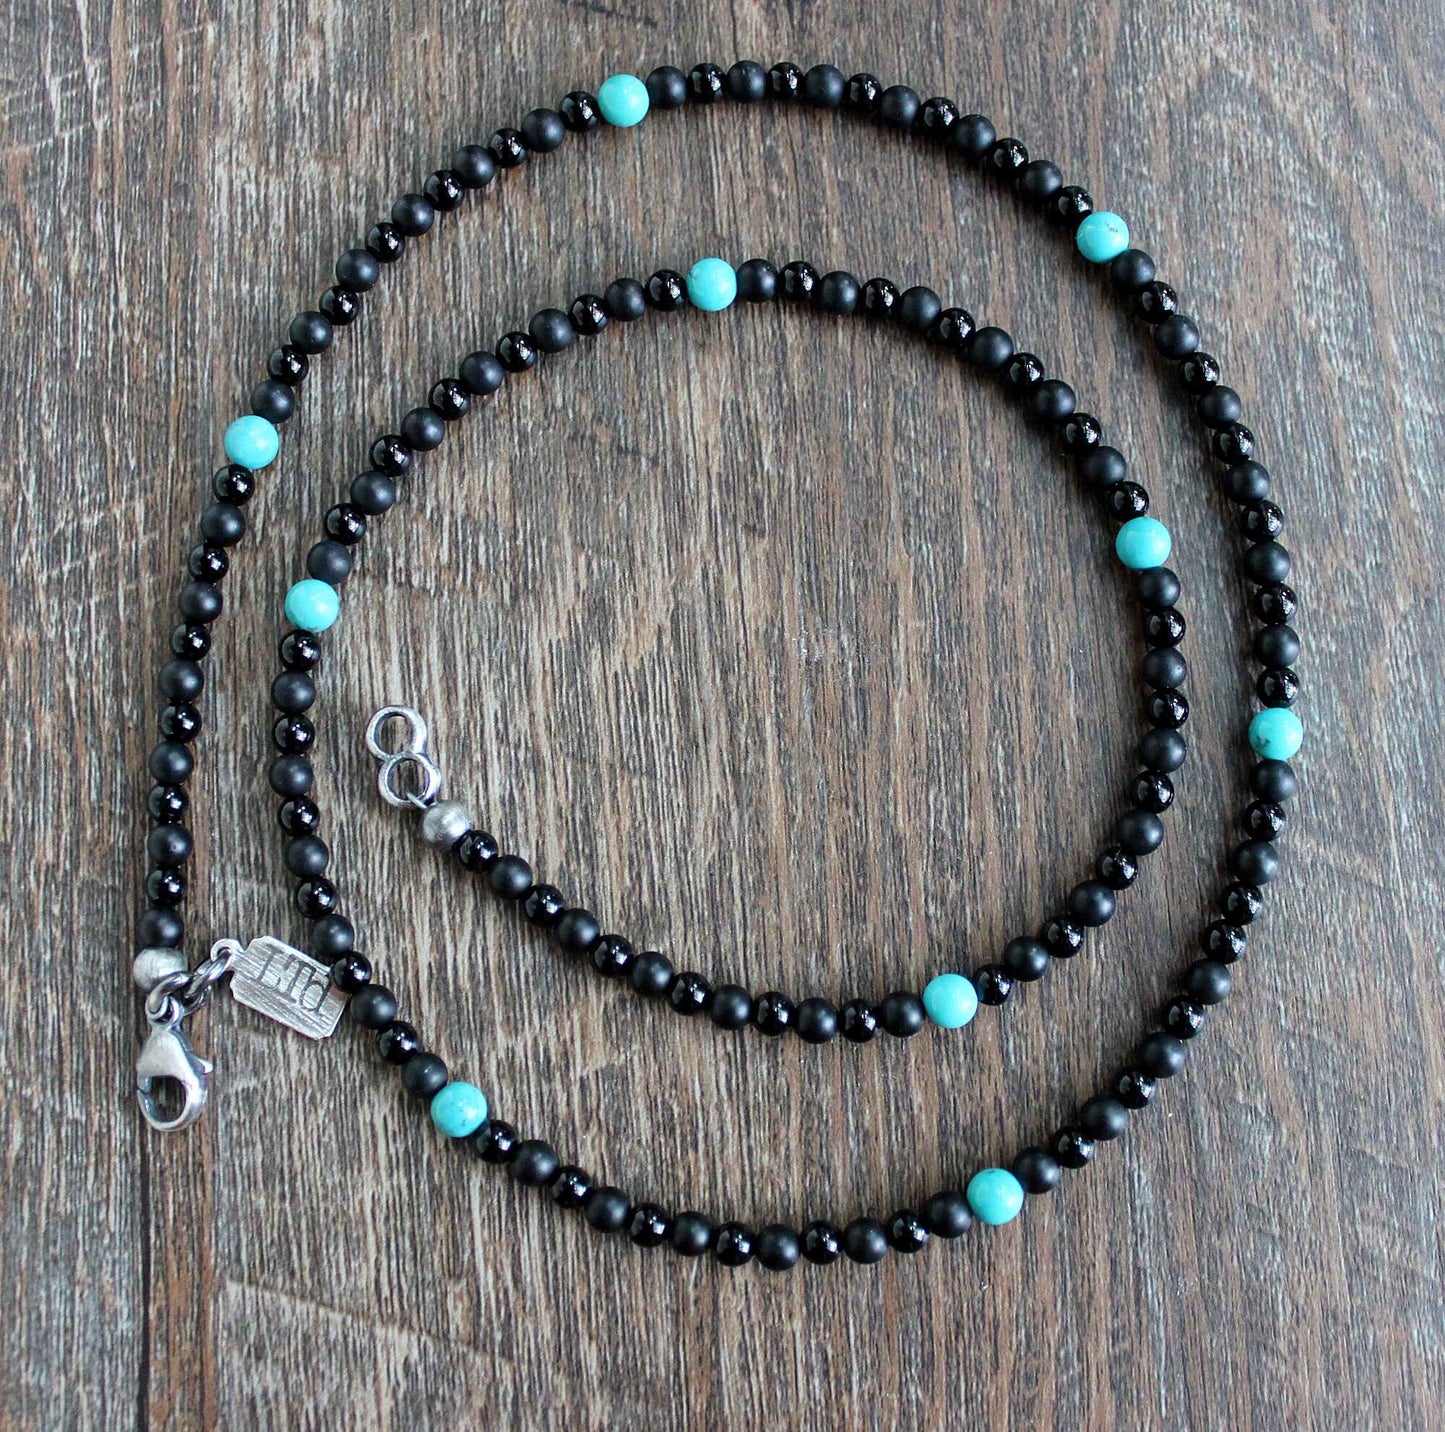 Black Onyx and Turquoise Bead Necklace